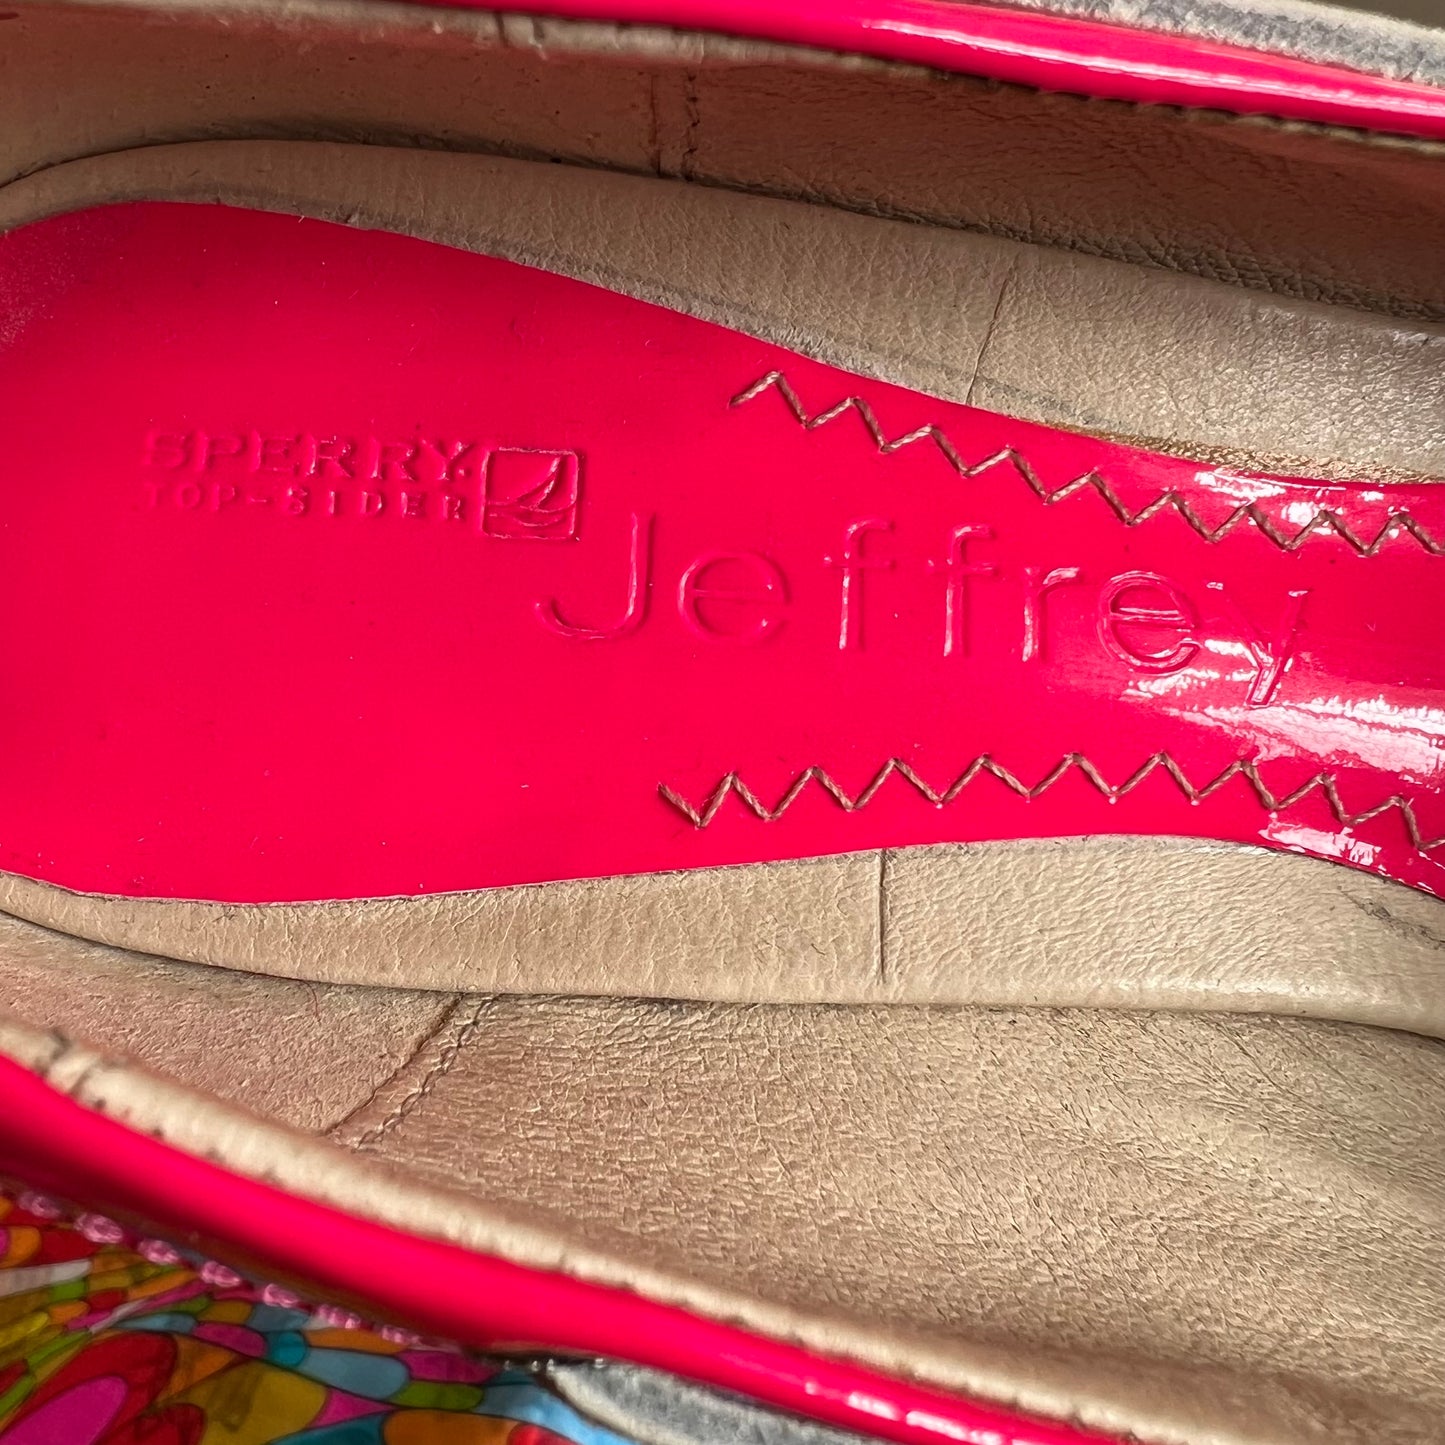 Hot Pink Jeffrey Sperry Top-Sider Patent Leather Chunky Heels-Size 8M